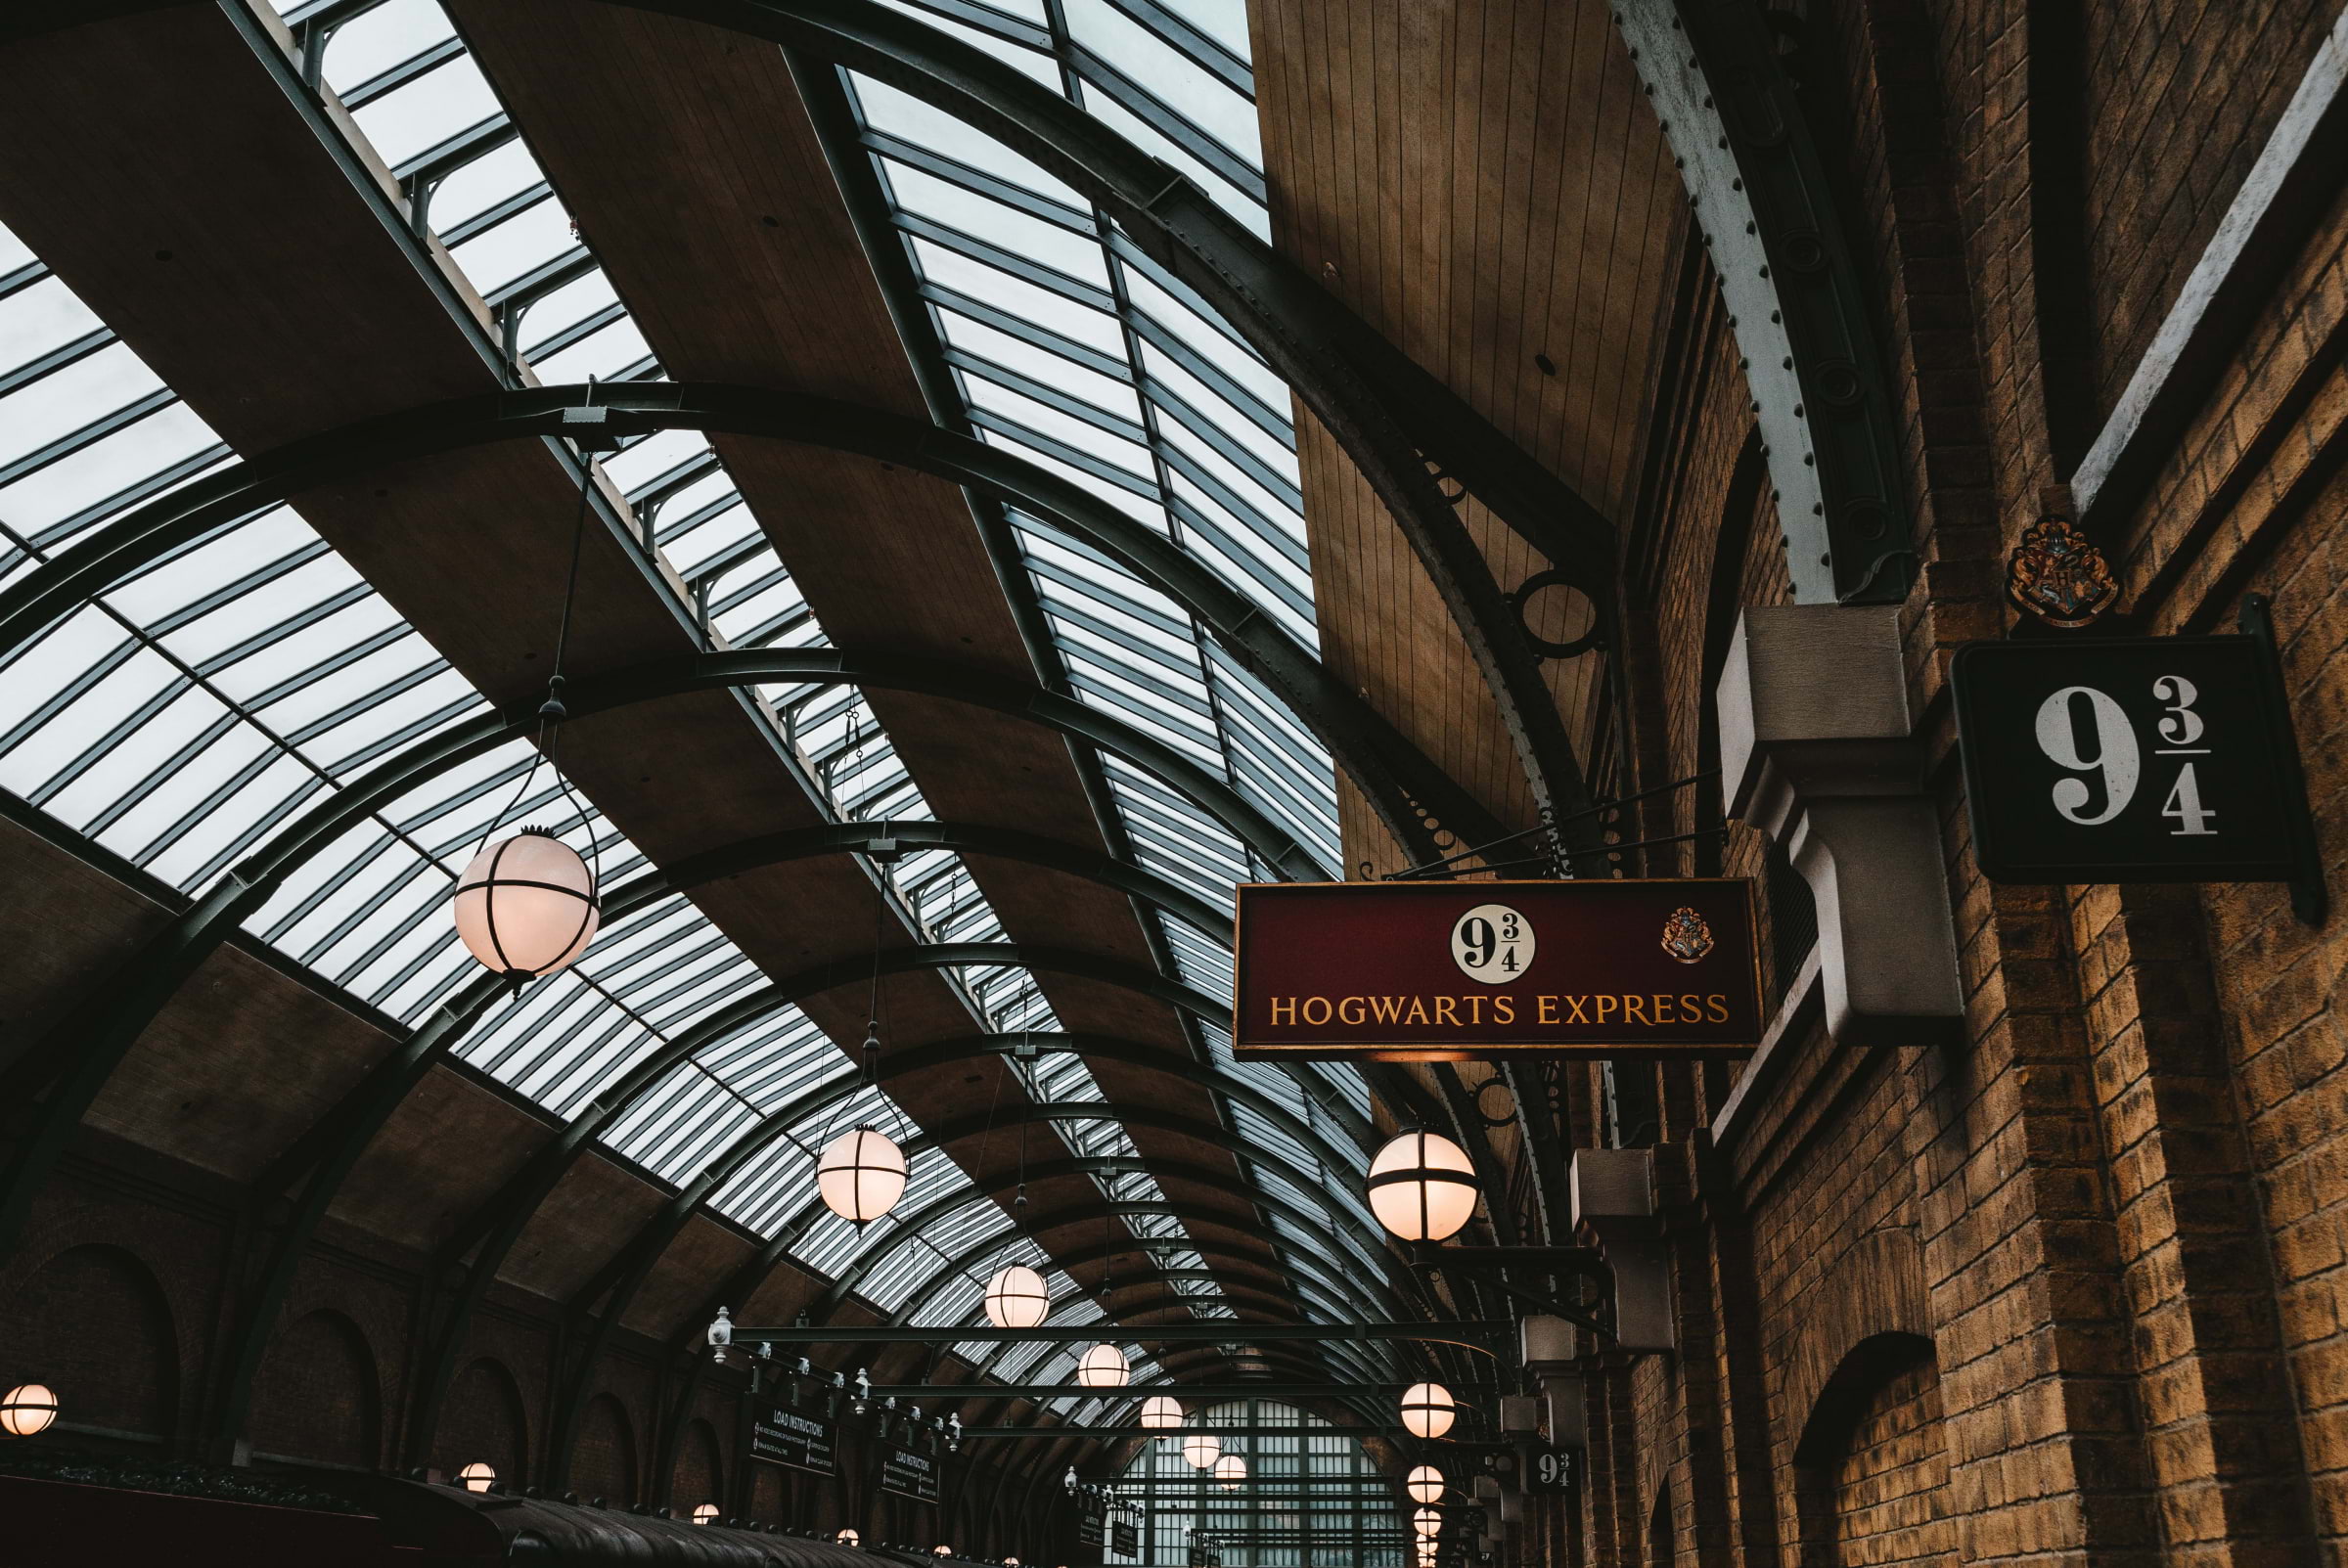 The Harry Potter guide to London